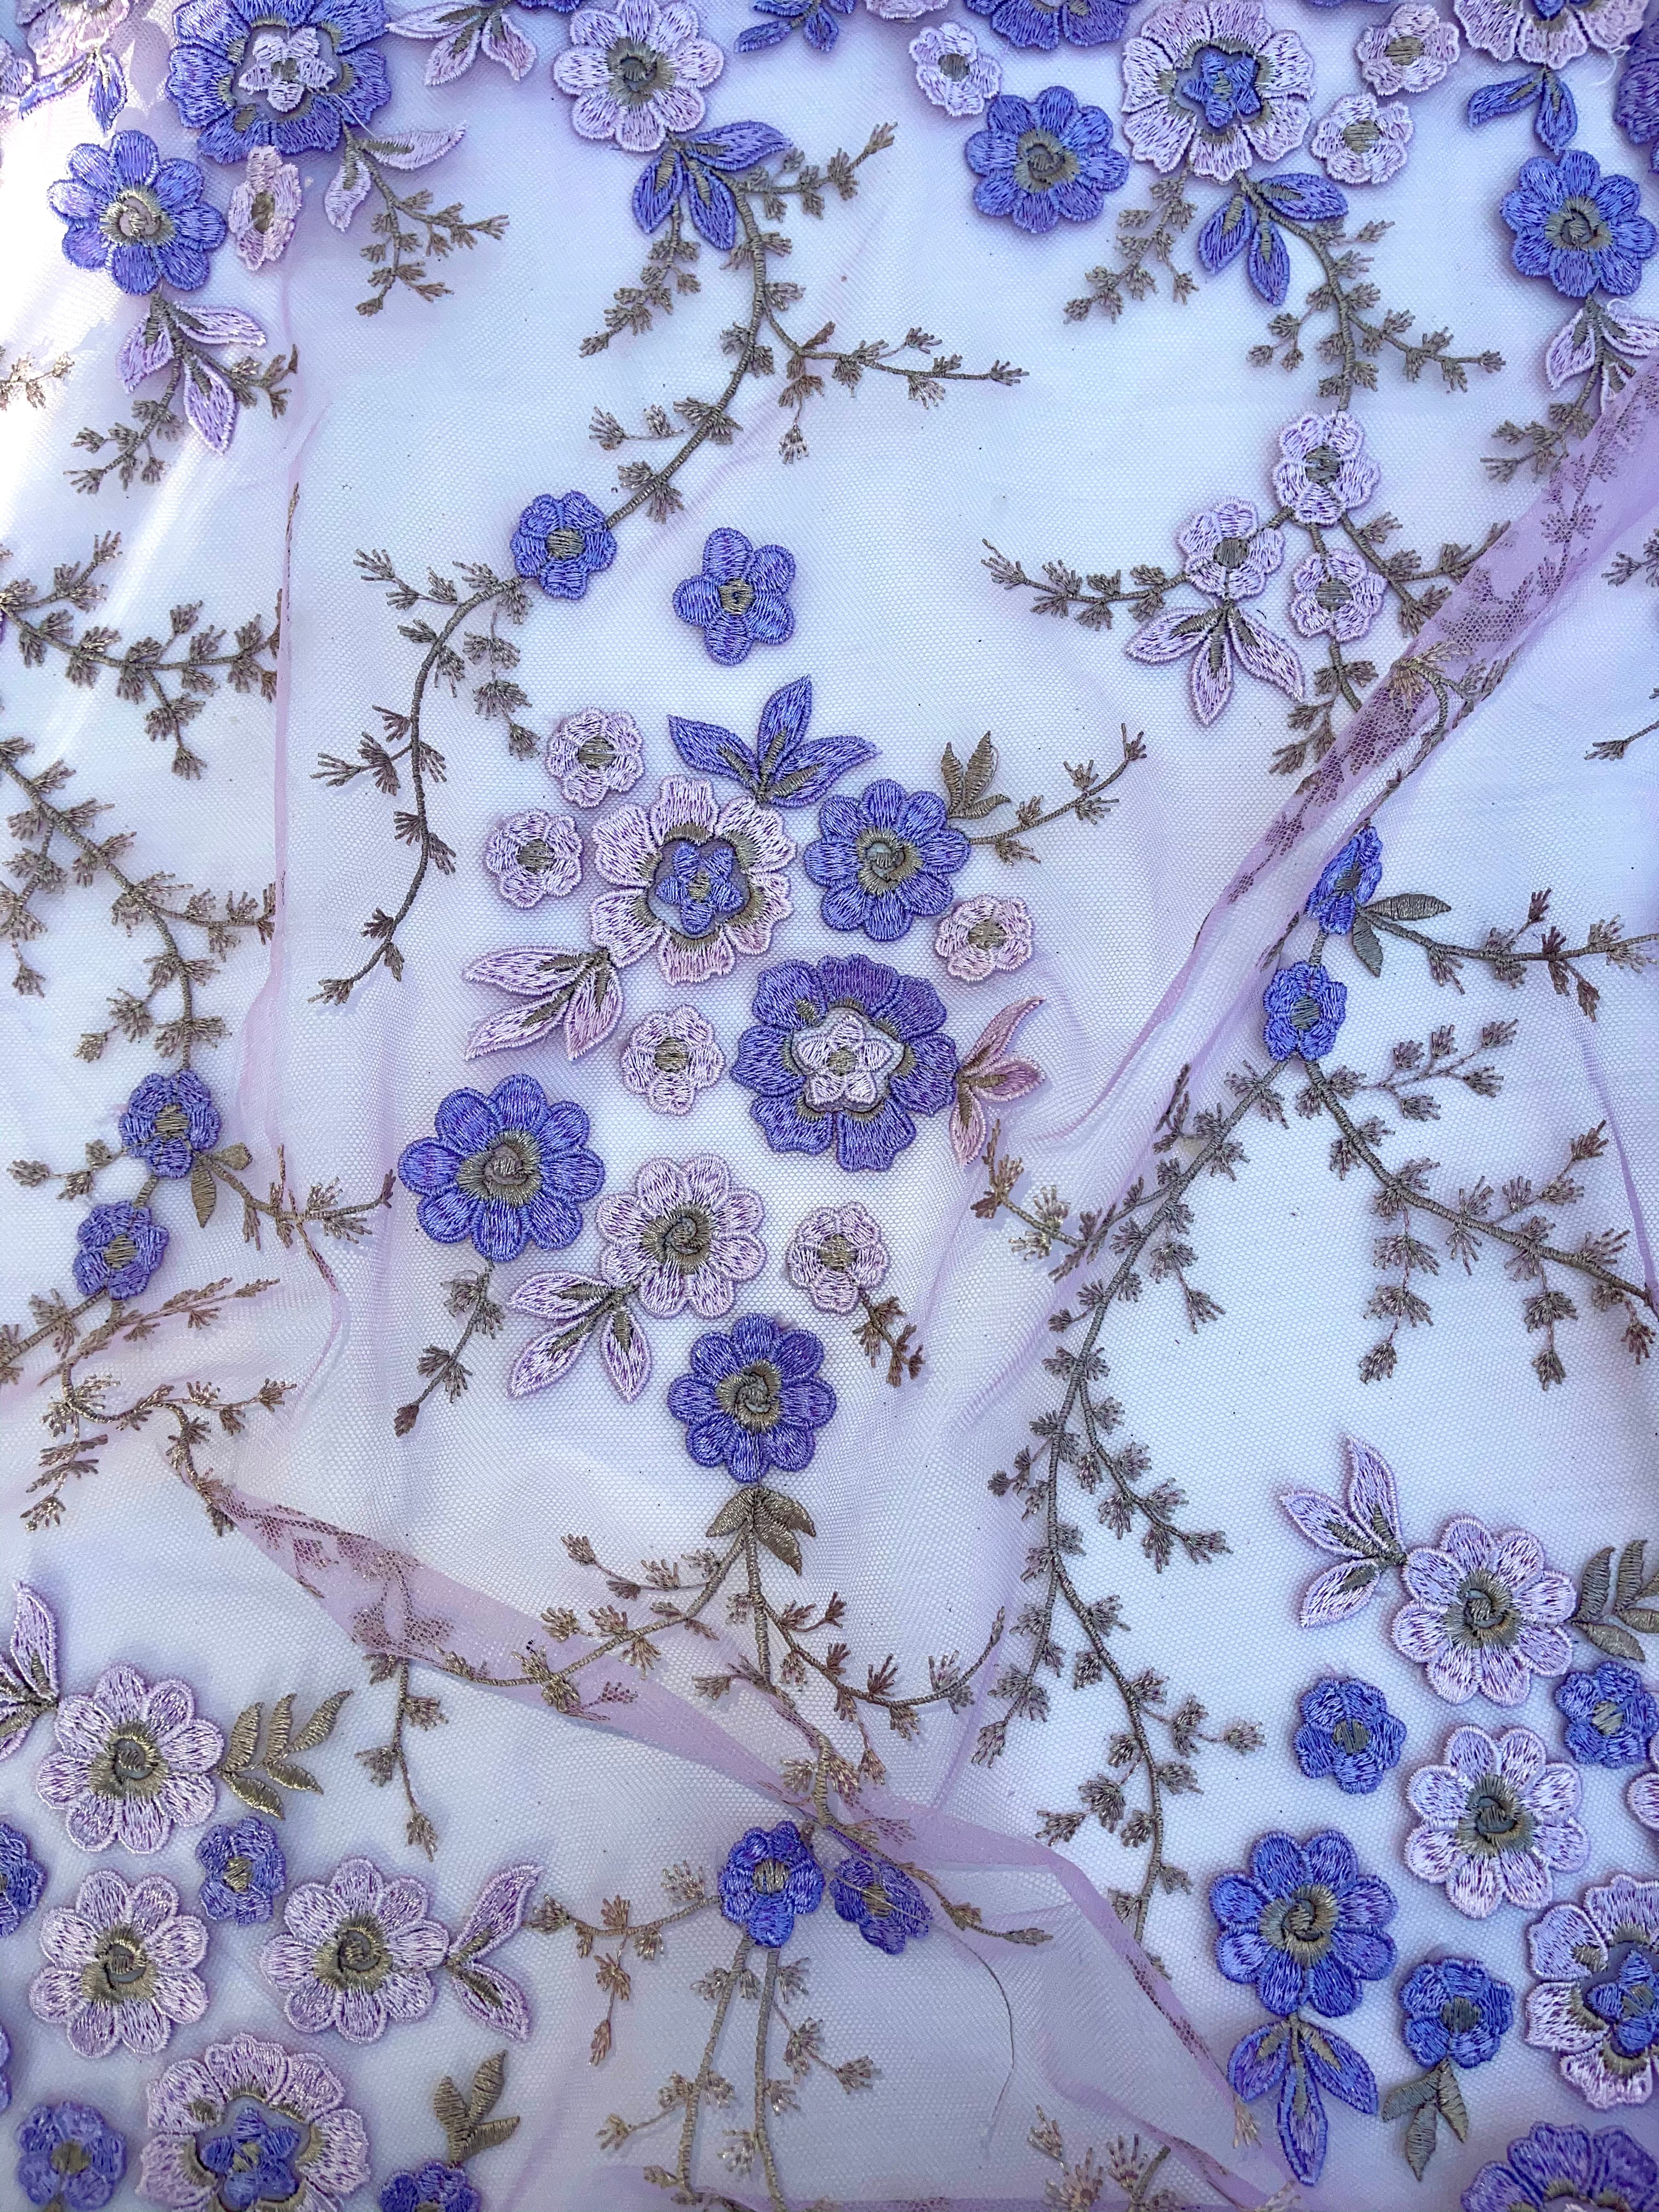 NEW ARRIVAL - Lavender Fields - Current stock has gold stitch through it